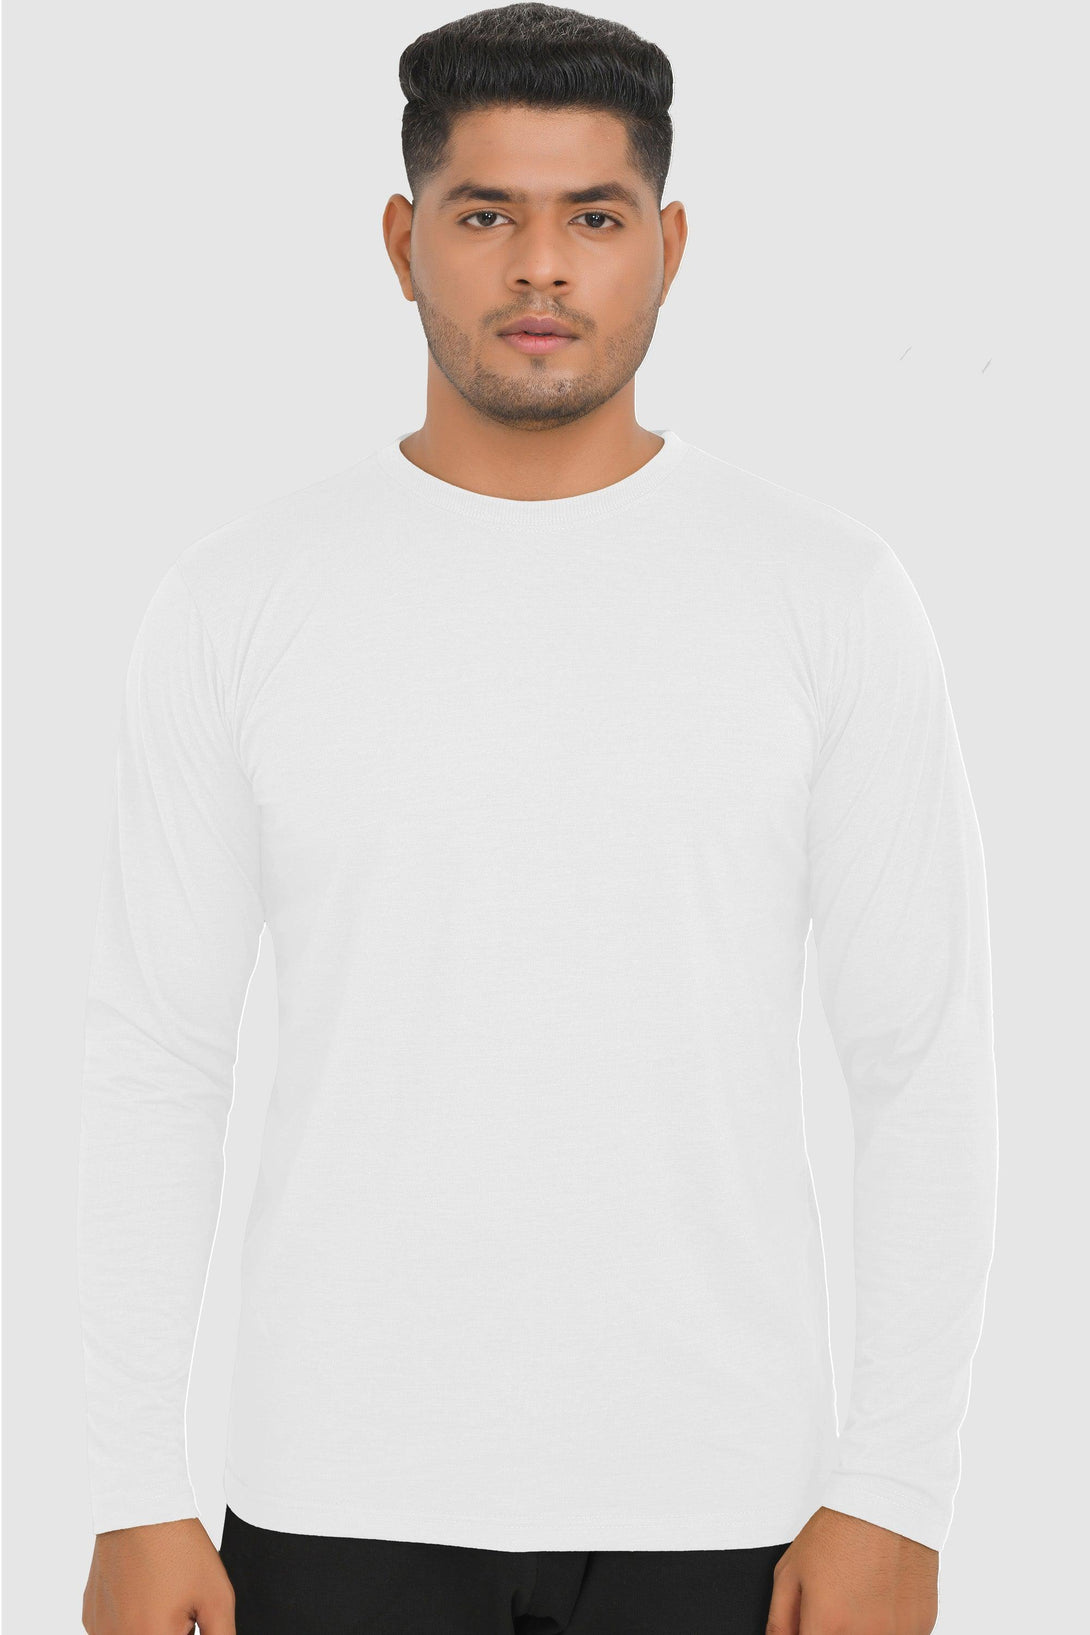 Long Sleeve Round Neck T-Shirts | NAVY - WHITE - CHARCOAL - BLACK - FTS